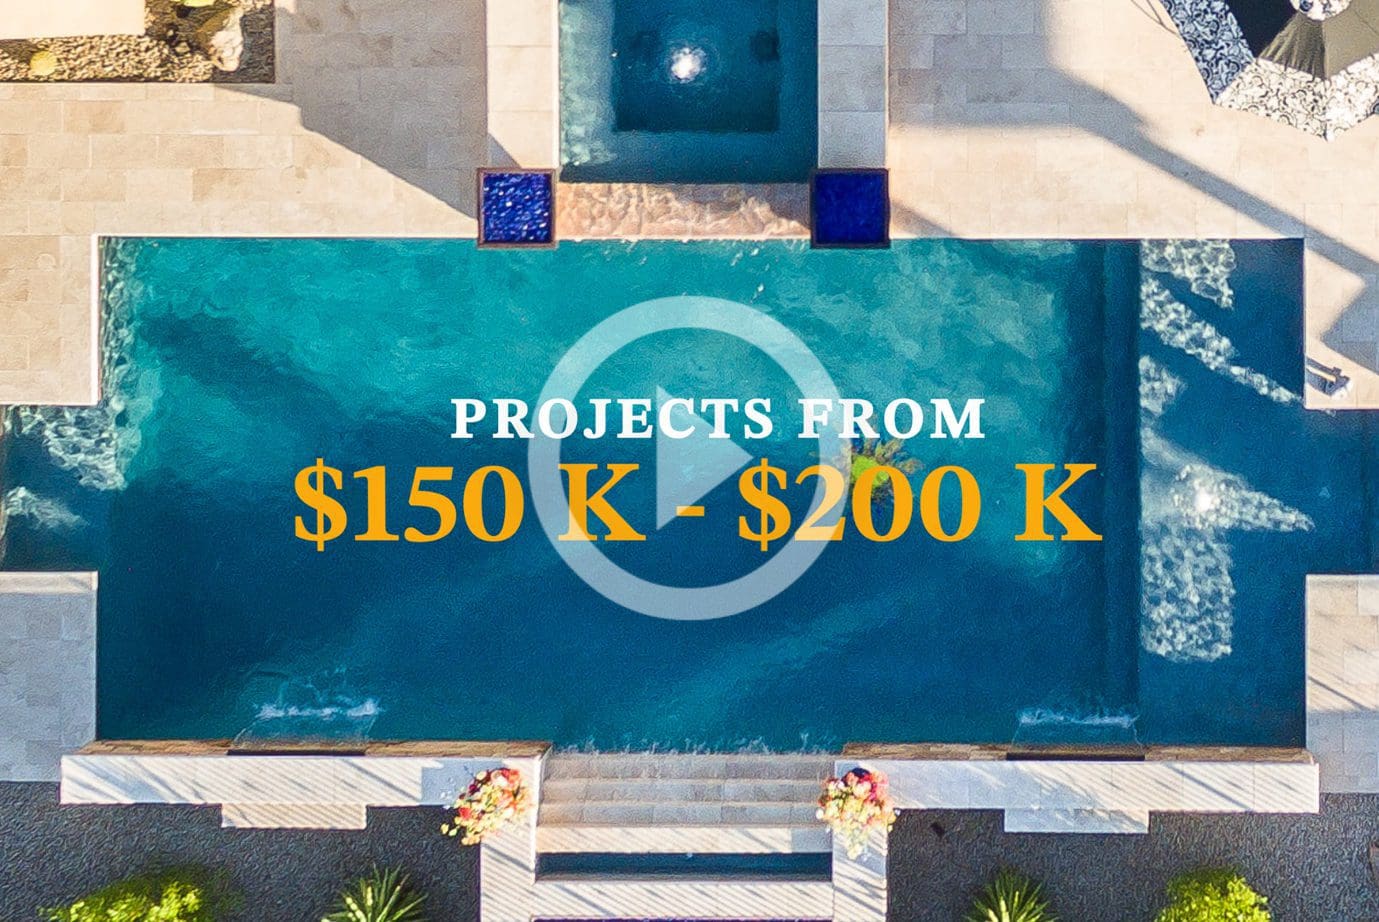 What Type Of Pool Can I Get With A $150 K – $200 K Budget?